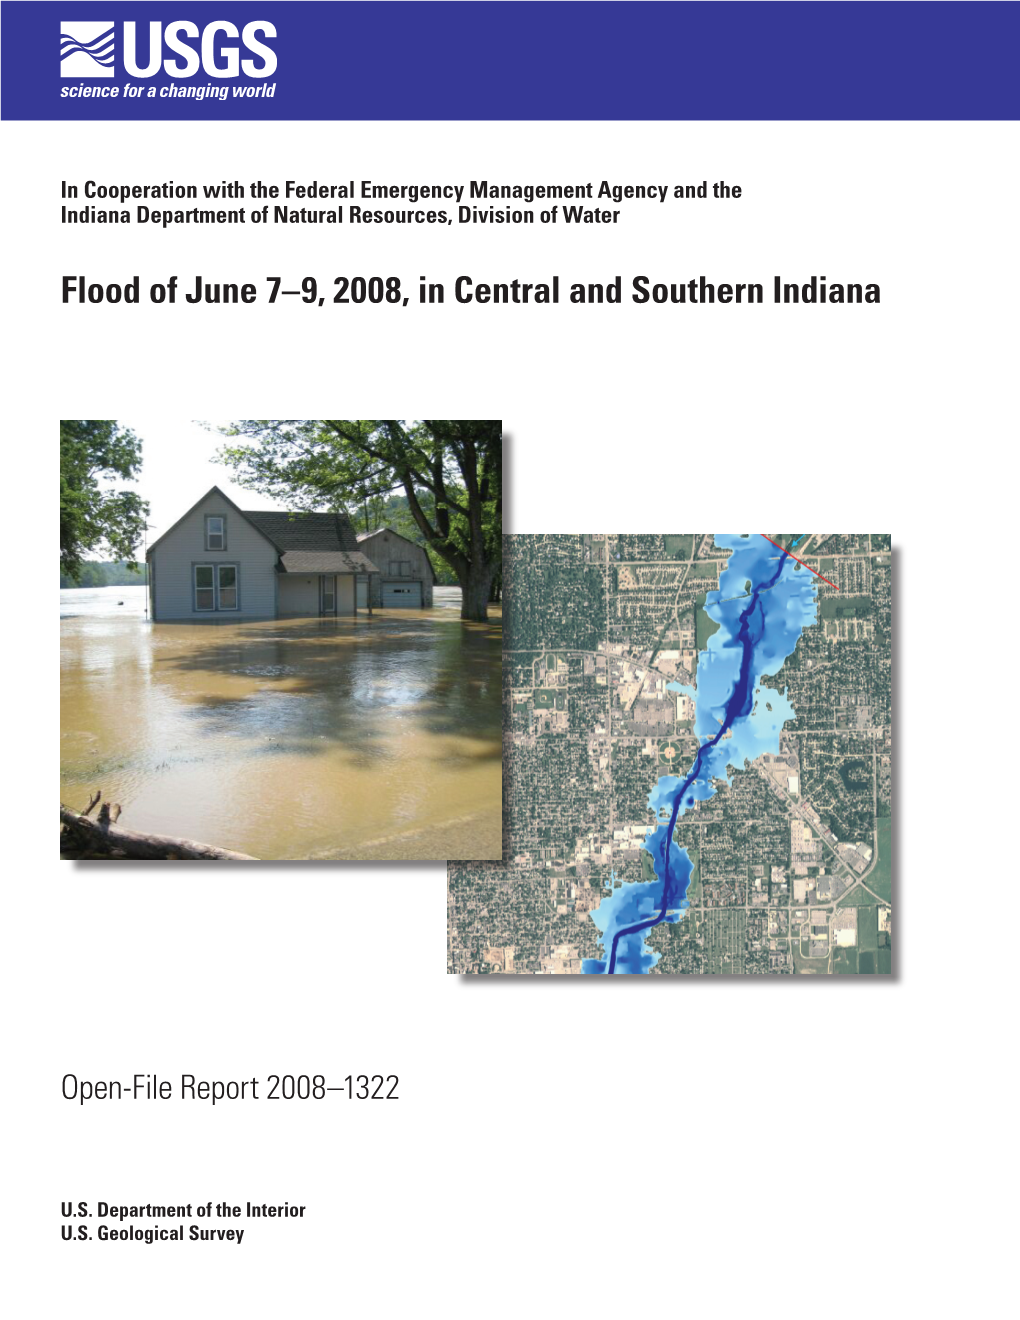 Flood of June 7–9, 2008, in Central and Southern Indiana